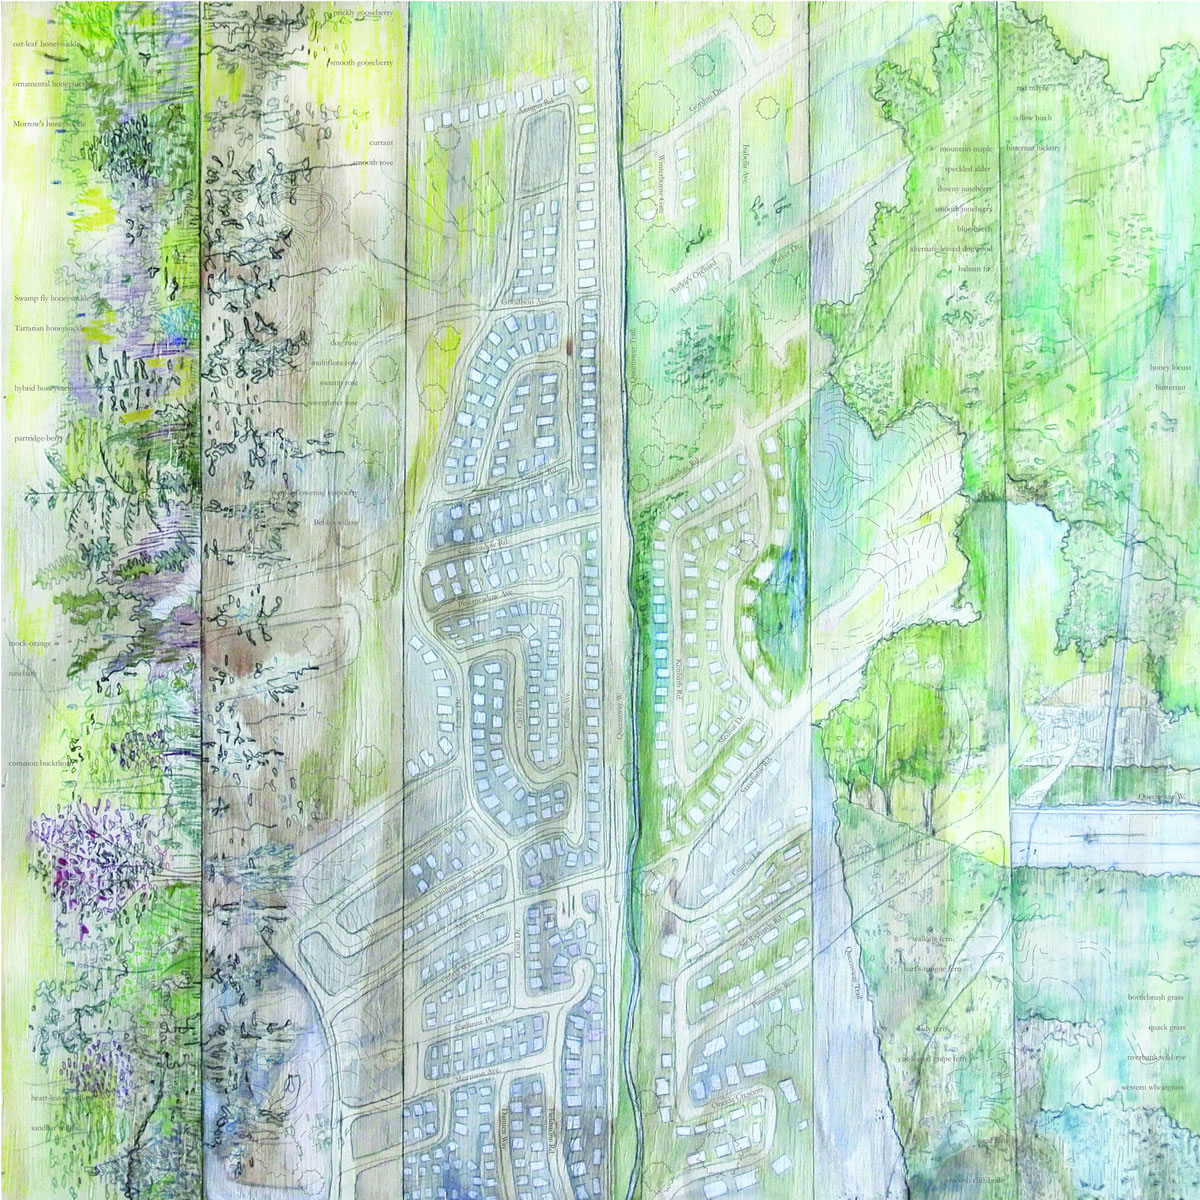 Light green and blue watercolour painting on wood, showing a forested area on the left, a bird’s eye view of the Queensway Trail in the middle and a landscape view on the right.